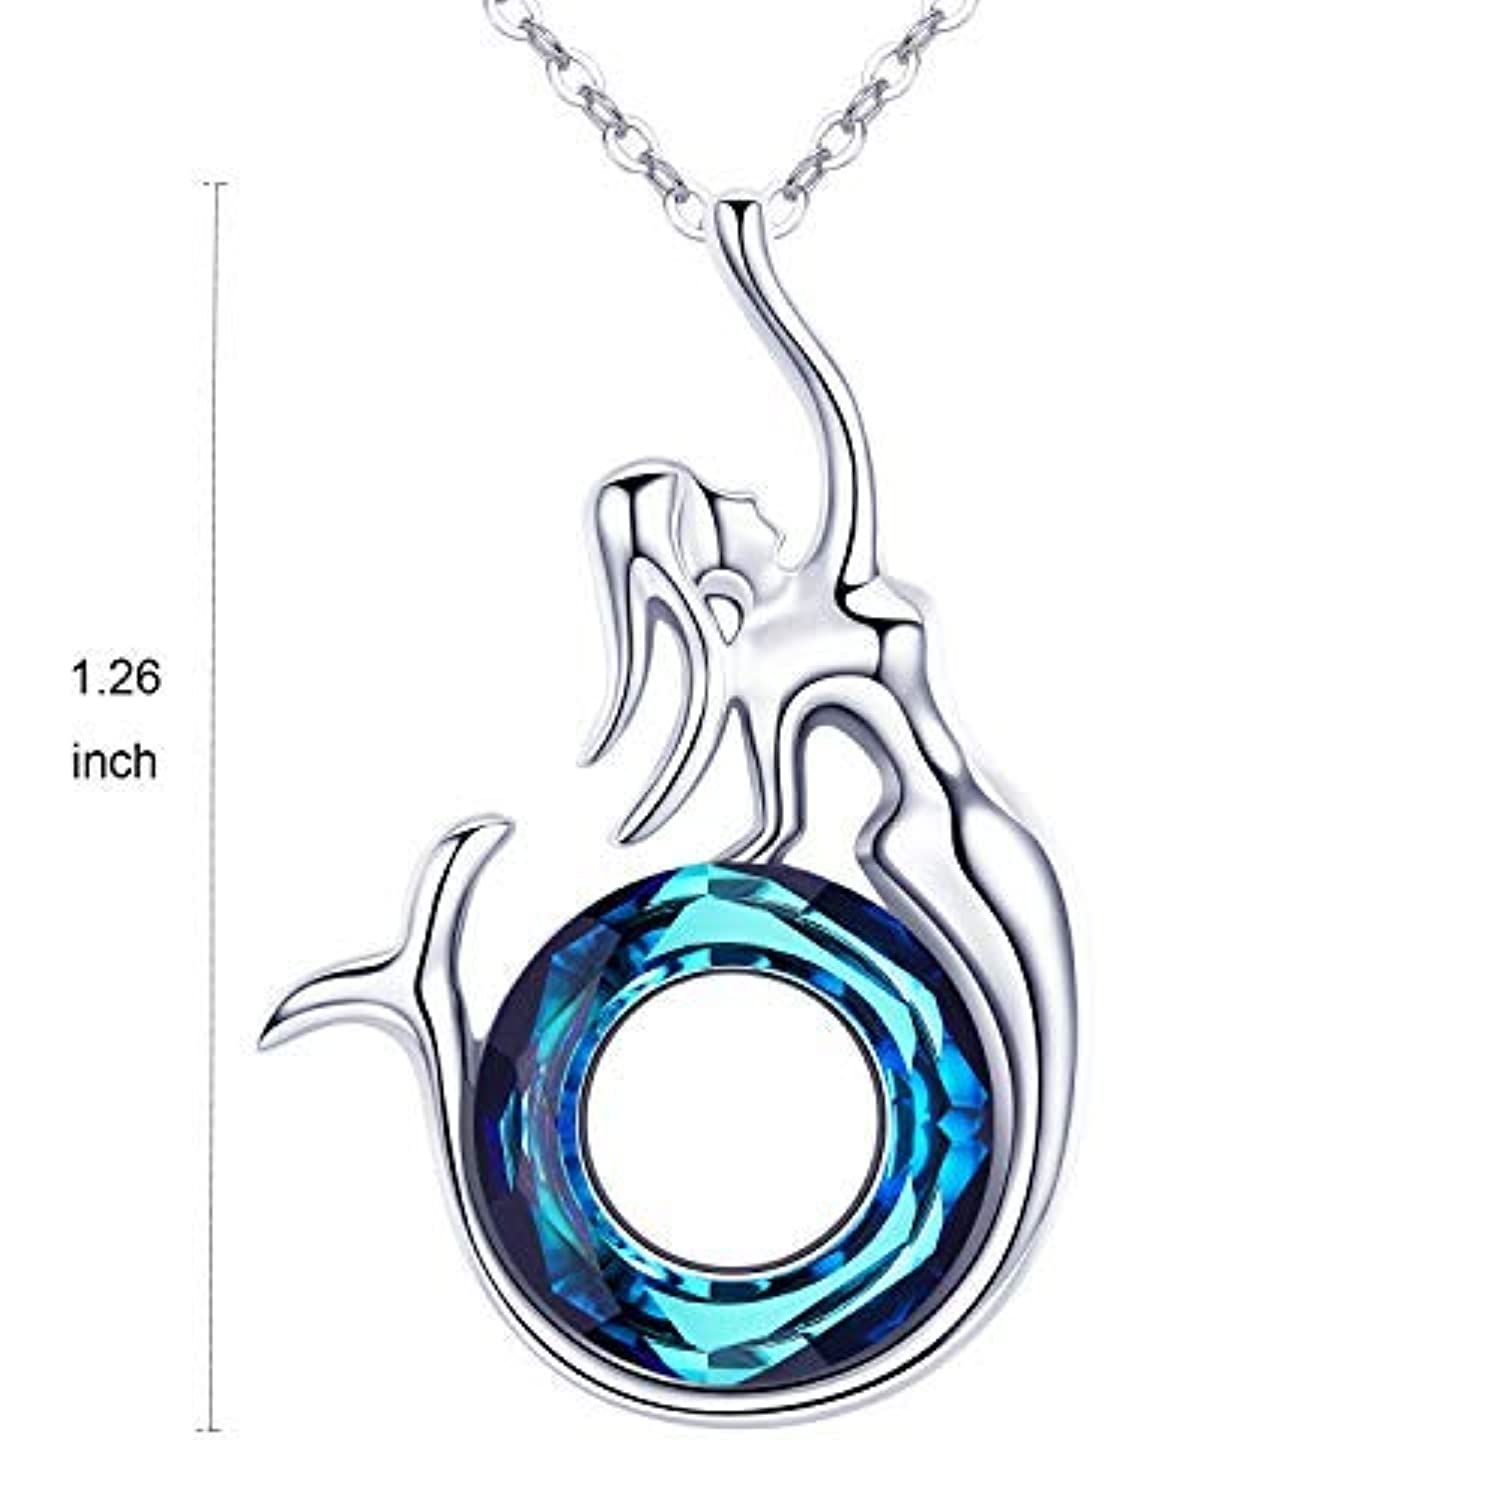 S925 Sterling Silver Mermaid Necklace White Gold Plated Jewelry Magic